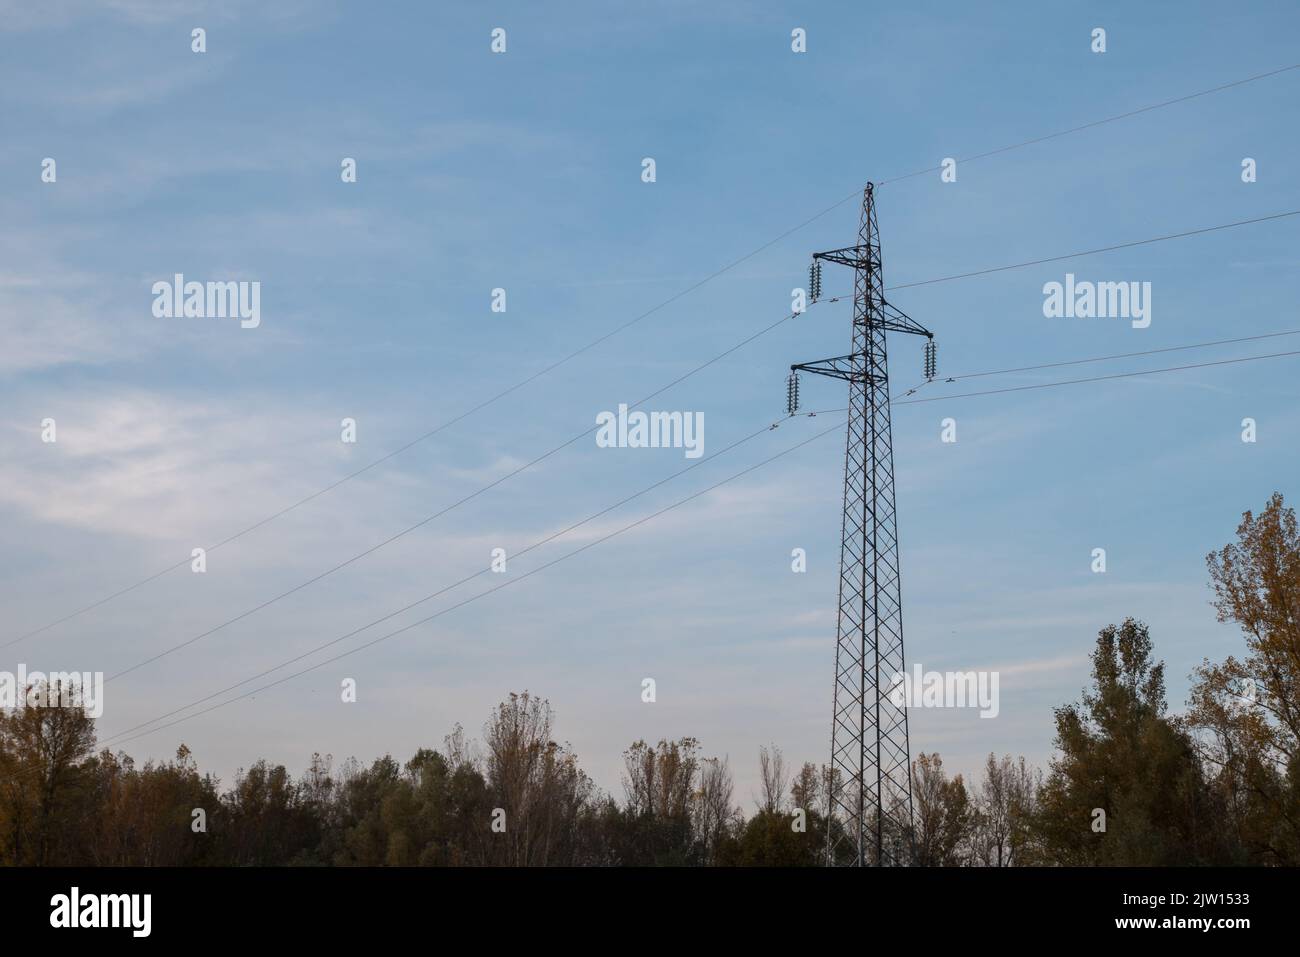 Power line pole, Electrical Pylon, wires, blue sky, clouds Stock Photo